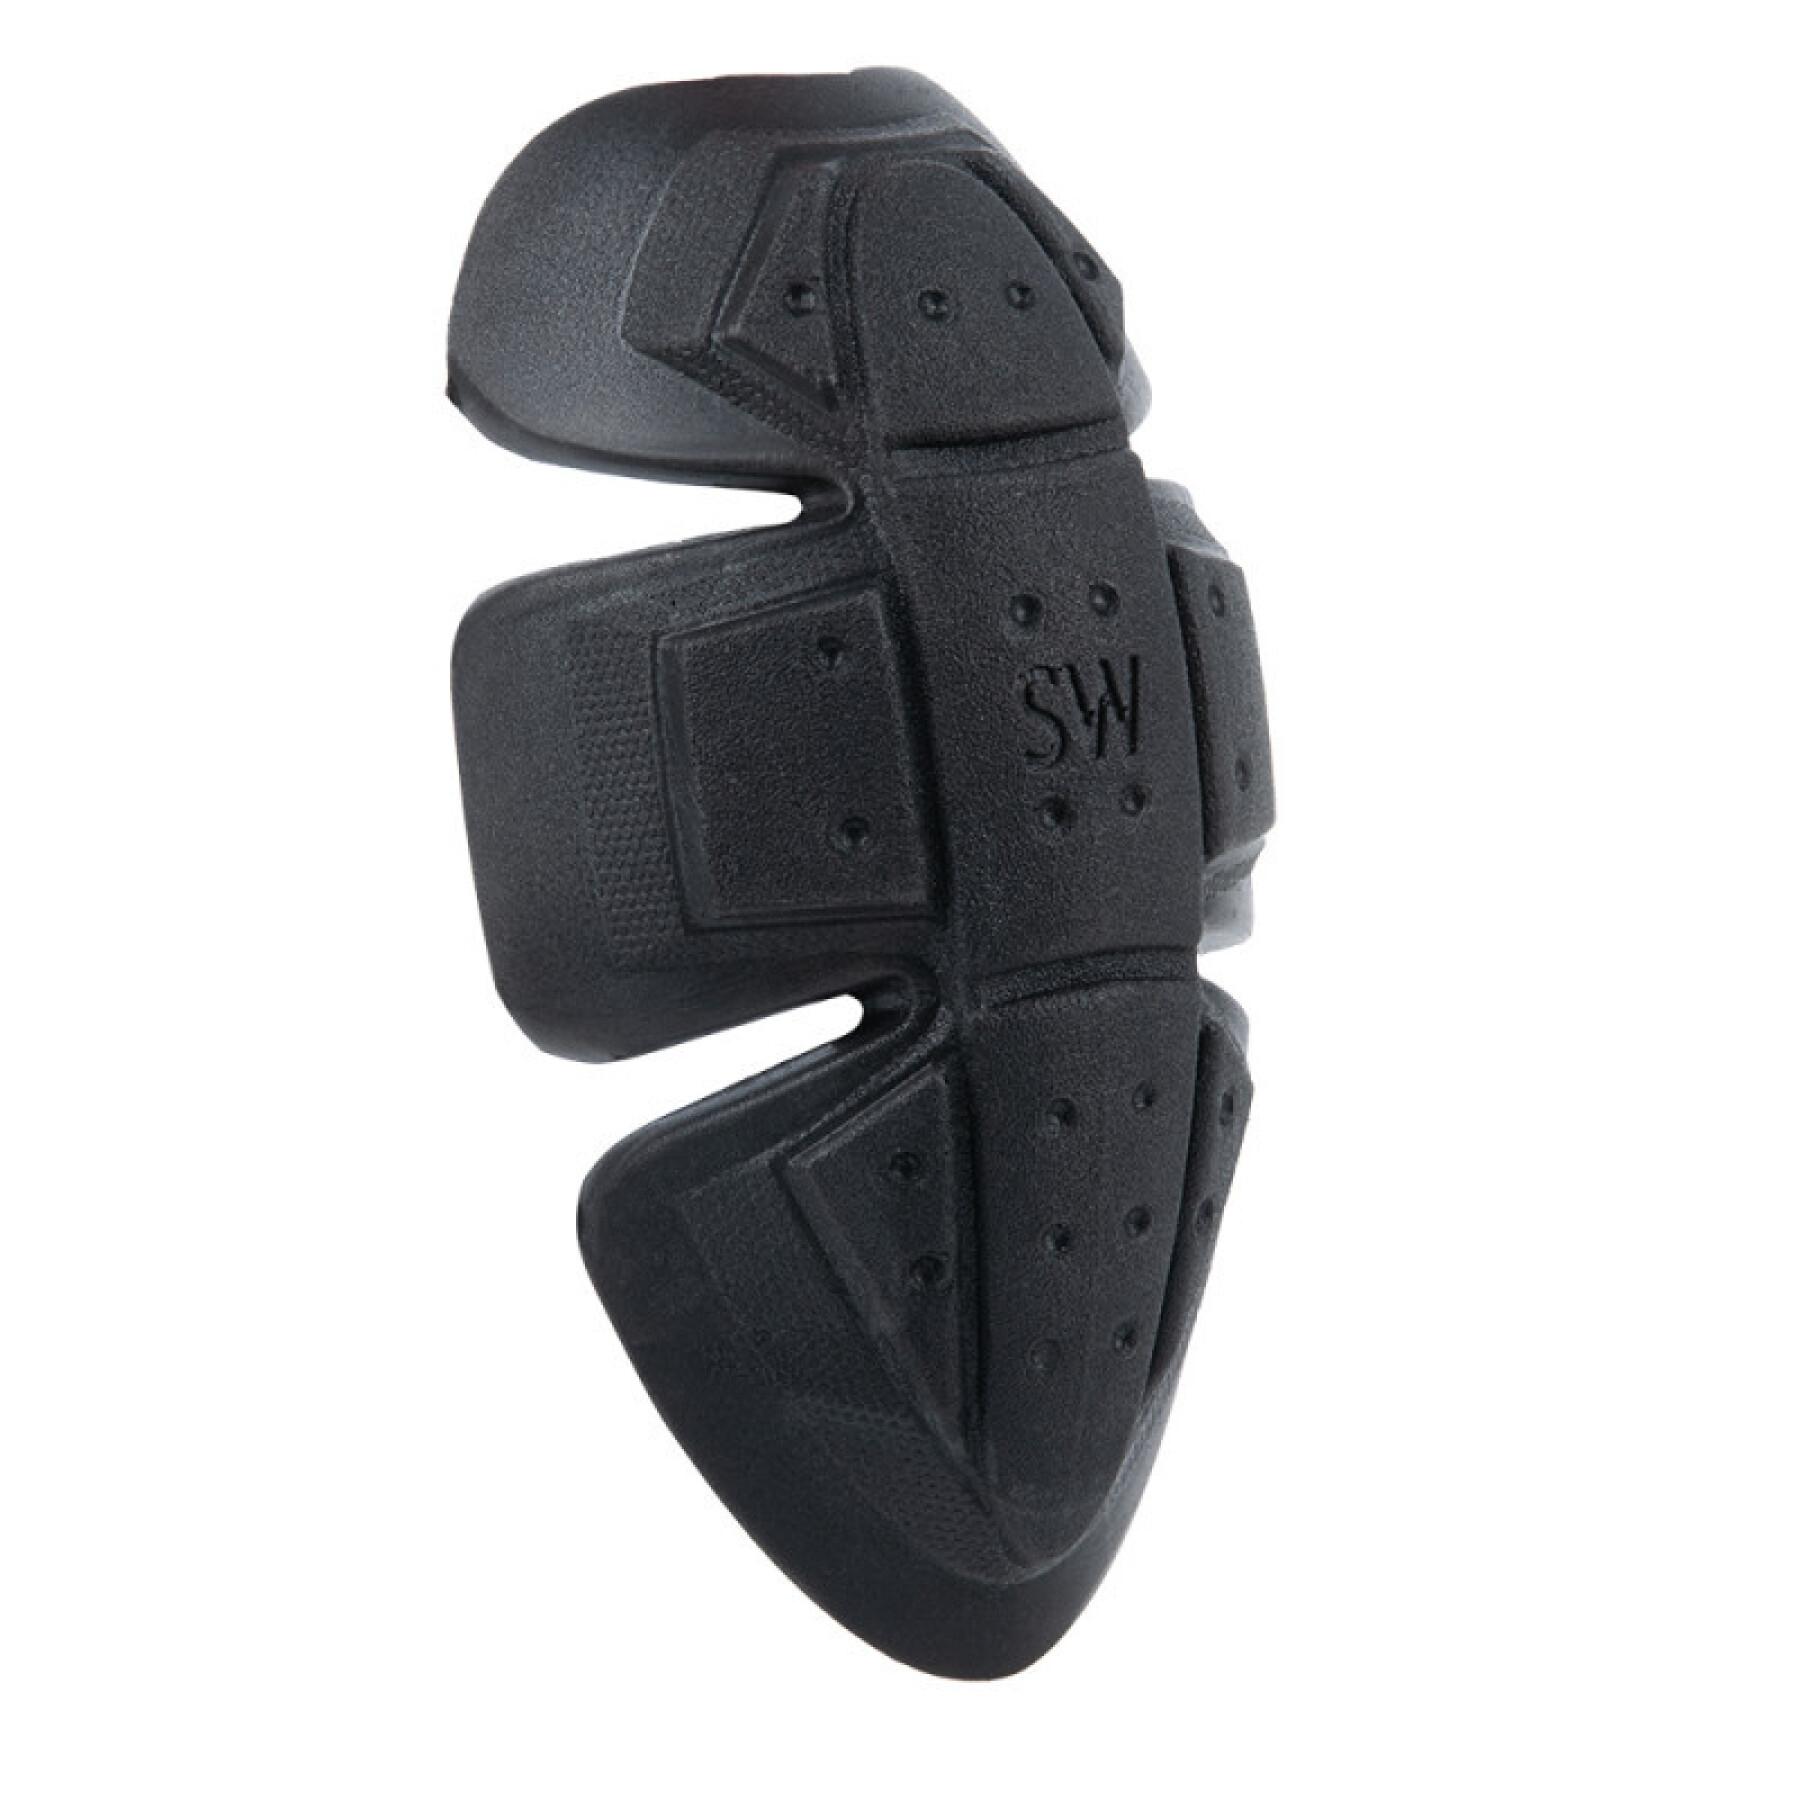 Motorcycle knee pad Oxford Level 1